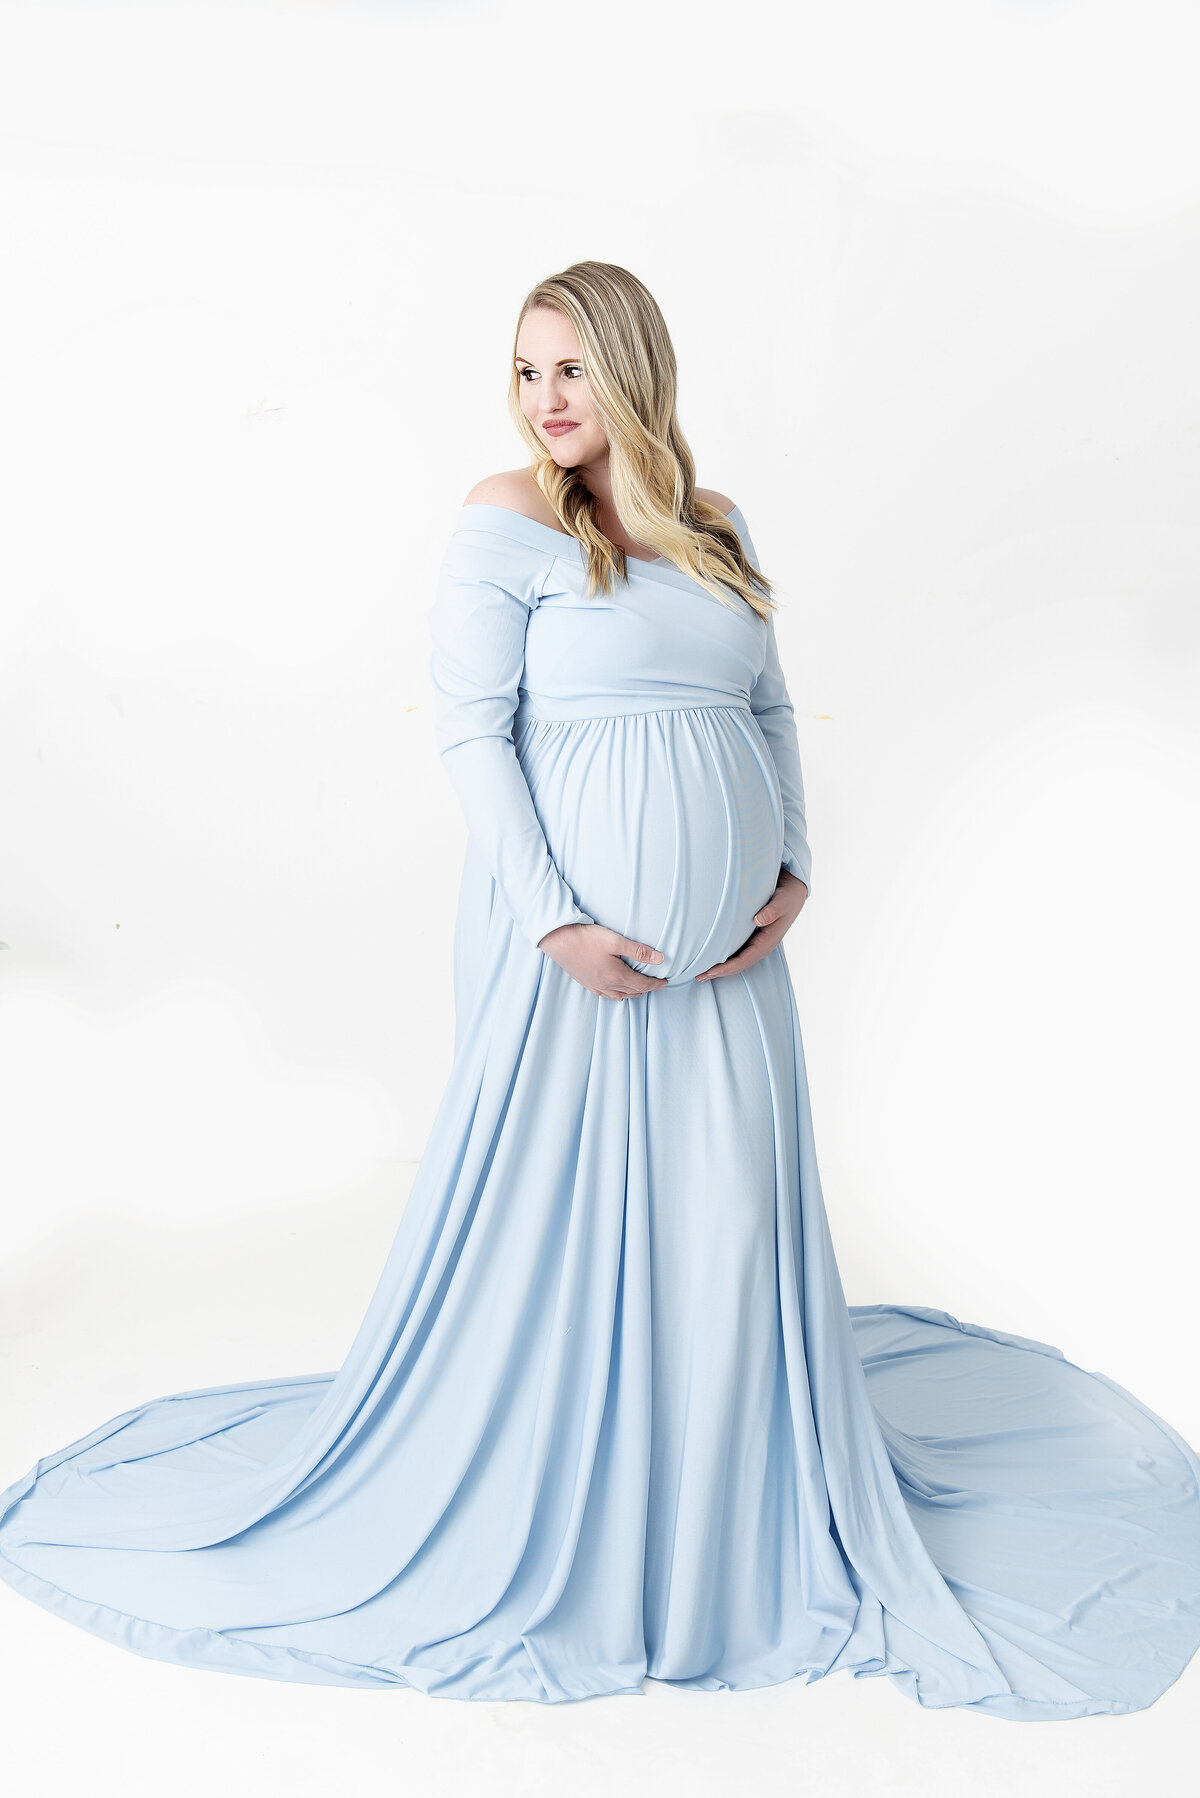 A blonde mother to be holds er bump while standing in a studio looking over her shoulder in a long blue maternity gown